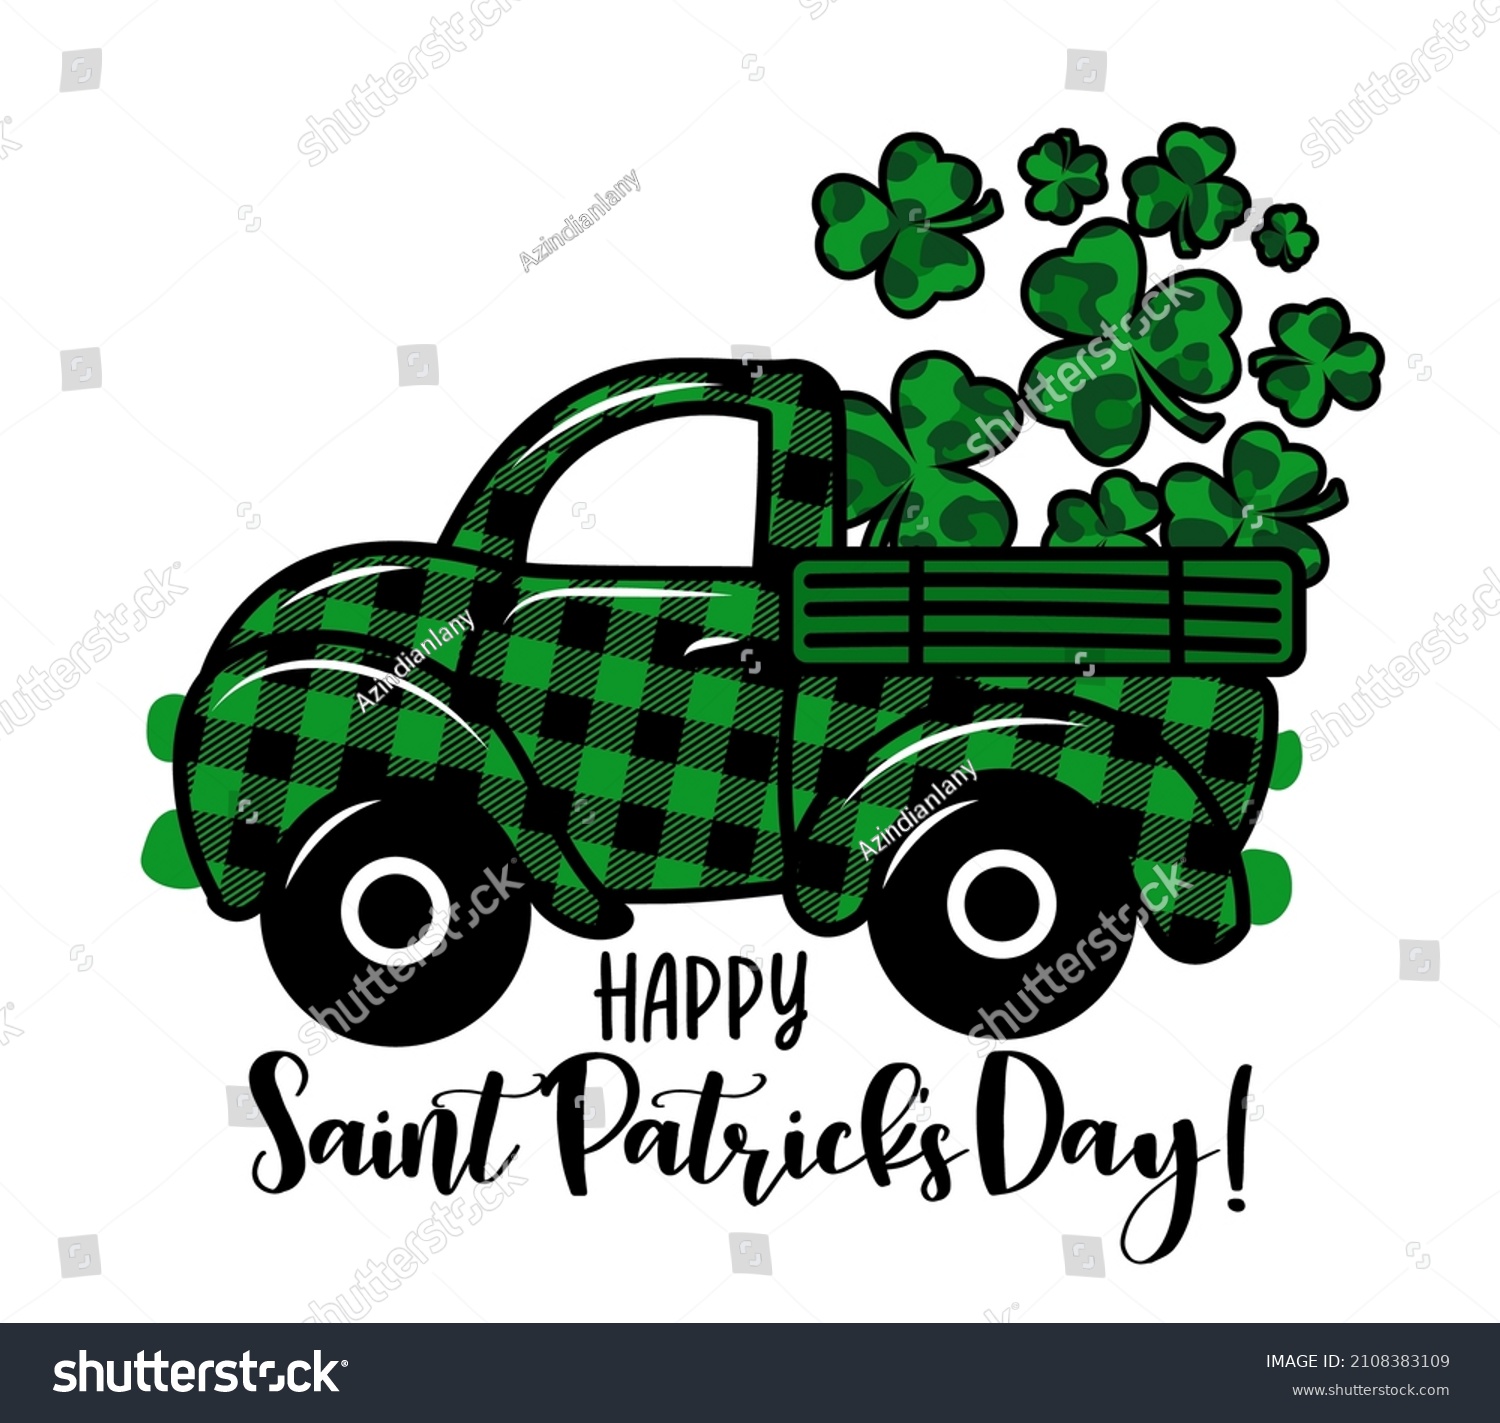 SVG of Happy Saint Patrick's Day! - Calligraphy phrase. Lettering for Lucky day greeting cards, invitations. Good for t-shirt, mug, gift, printing press. Buffalo plaid pickup carry  leopard Shamrocks svg